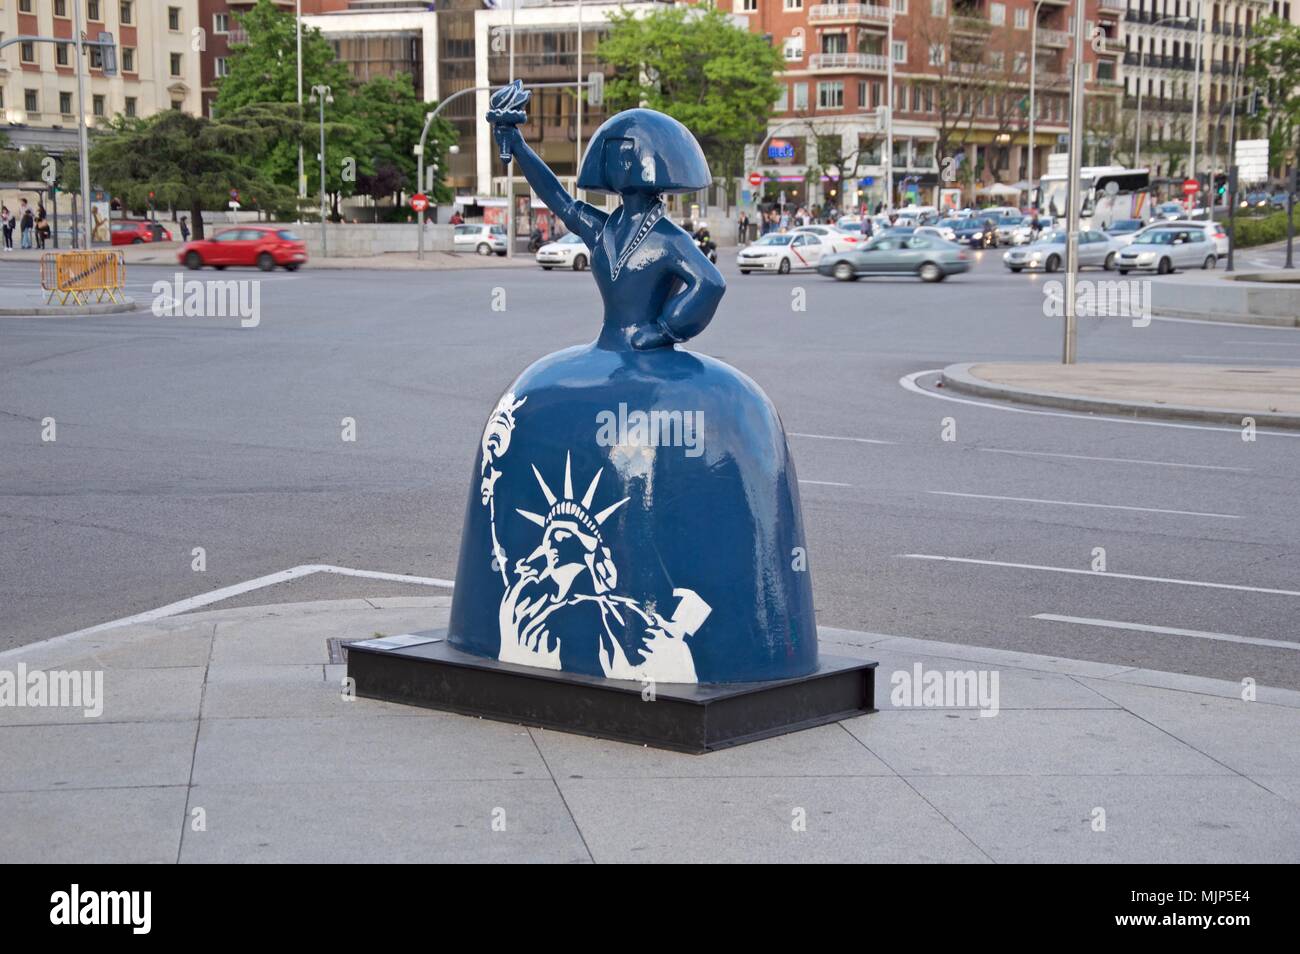 MADRID, SPAIN - MAY 5: Sculpture of a surreal menina on May 5, 2018 in Madrid, Spain. Stock Photo